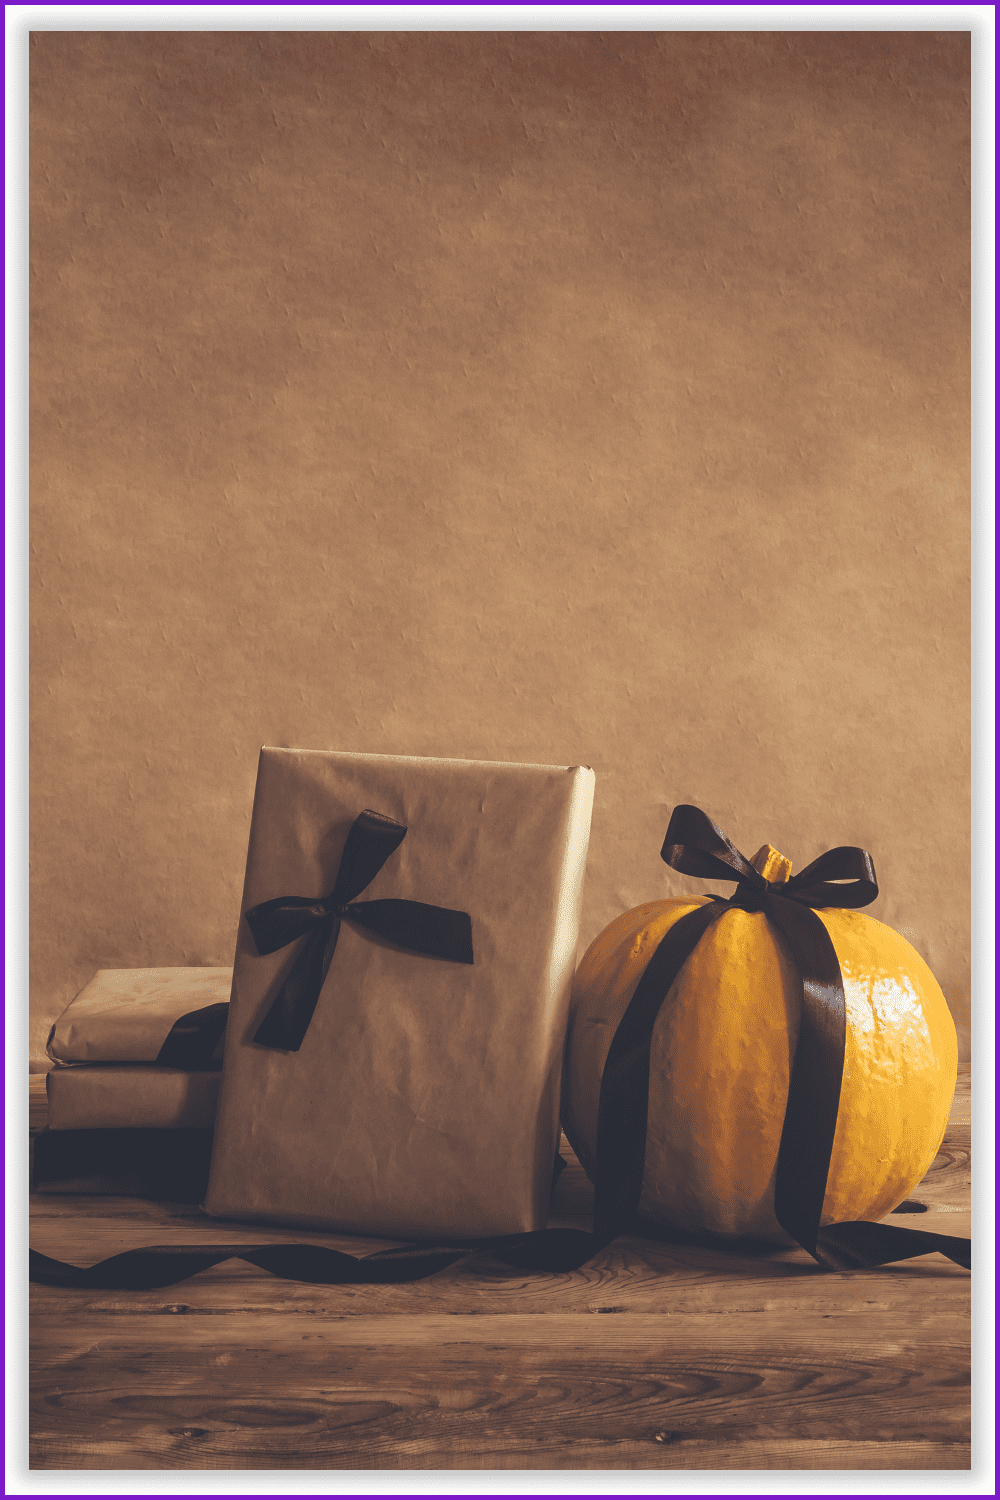 Photo of a yellow pumpkin and a gift wrapped in paper against a brown wall.